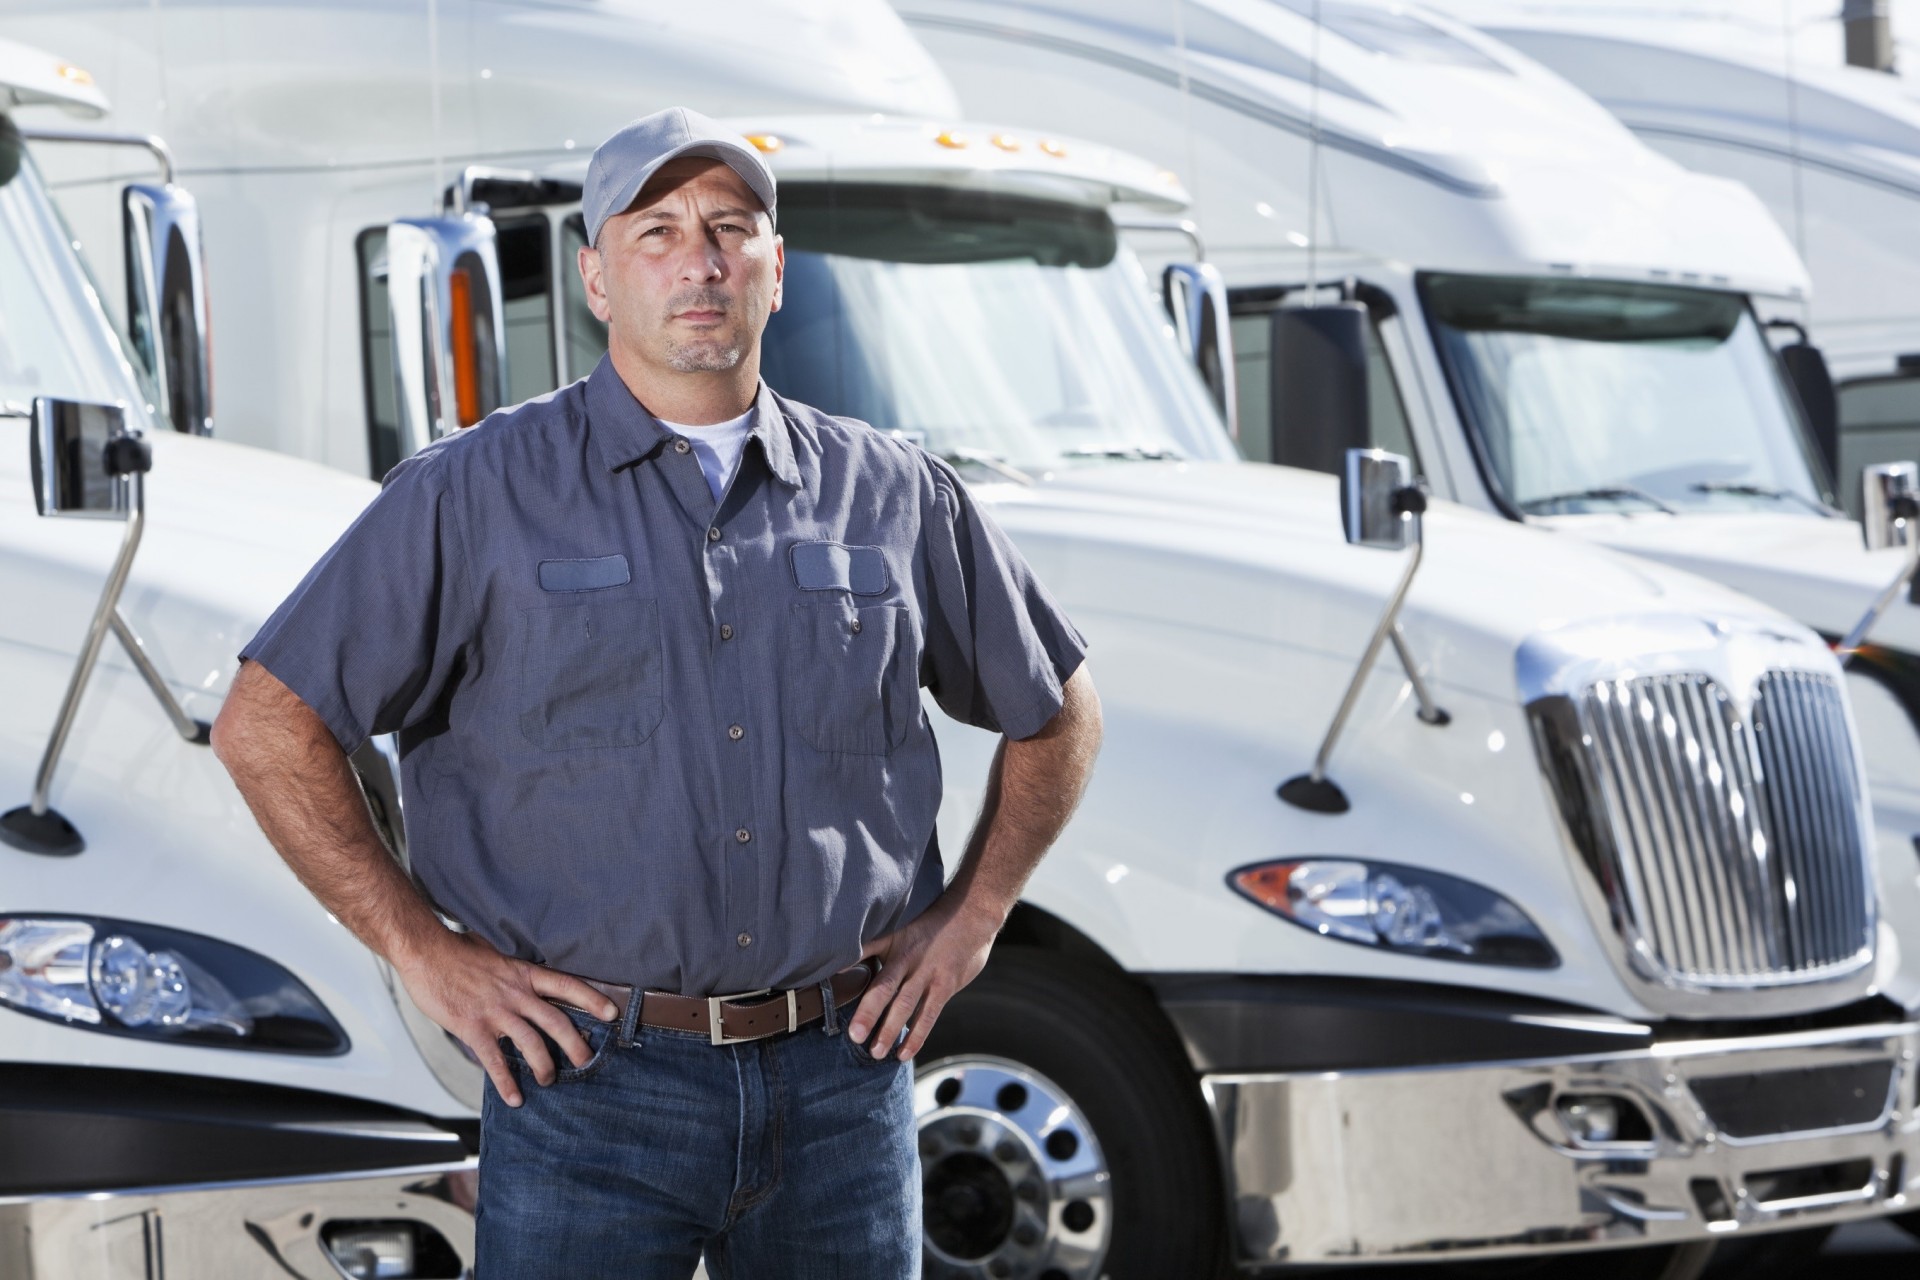 Motor carrier, freight forwarder or broker – what is the difference?